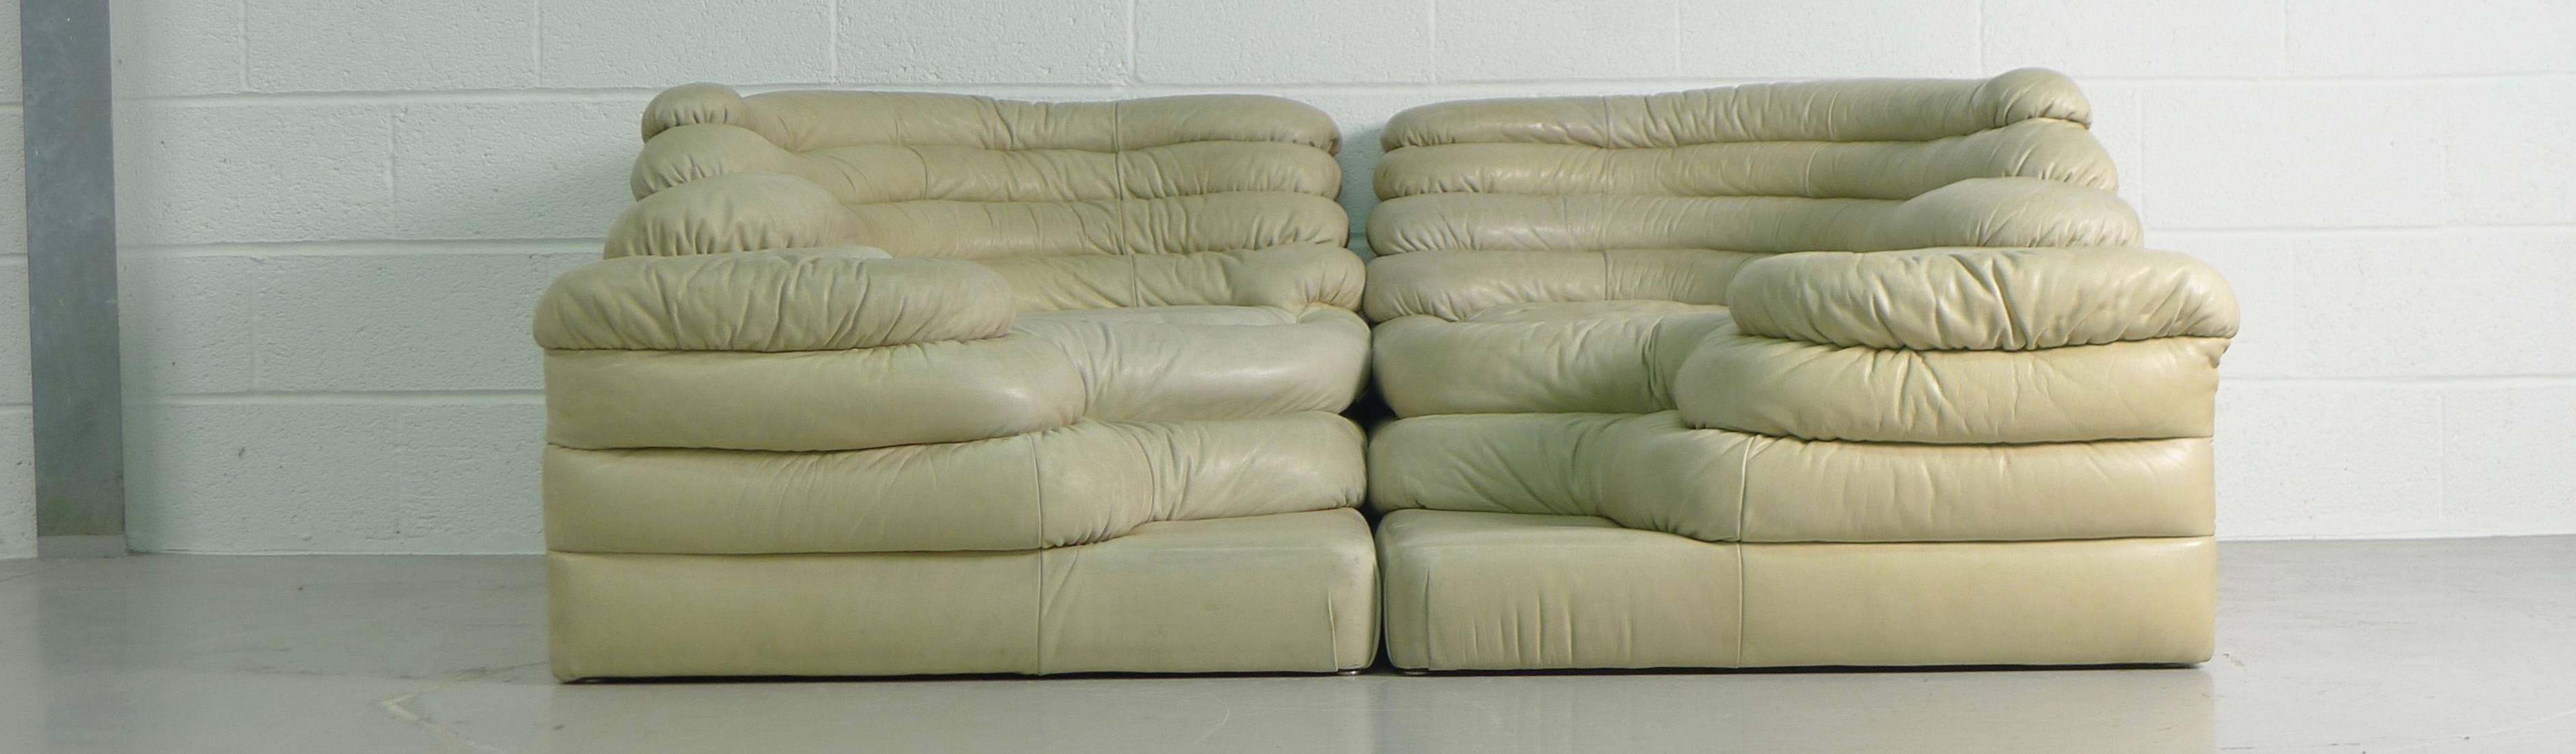 Late 20th Century De Sede Pair of Terrazza Sofas in Ivory Leather, Ubald Klug